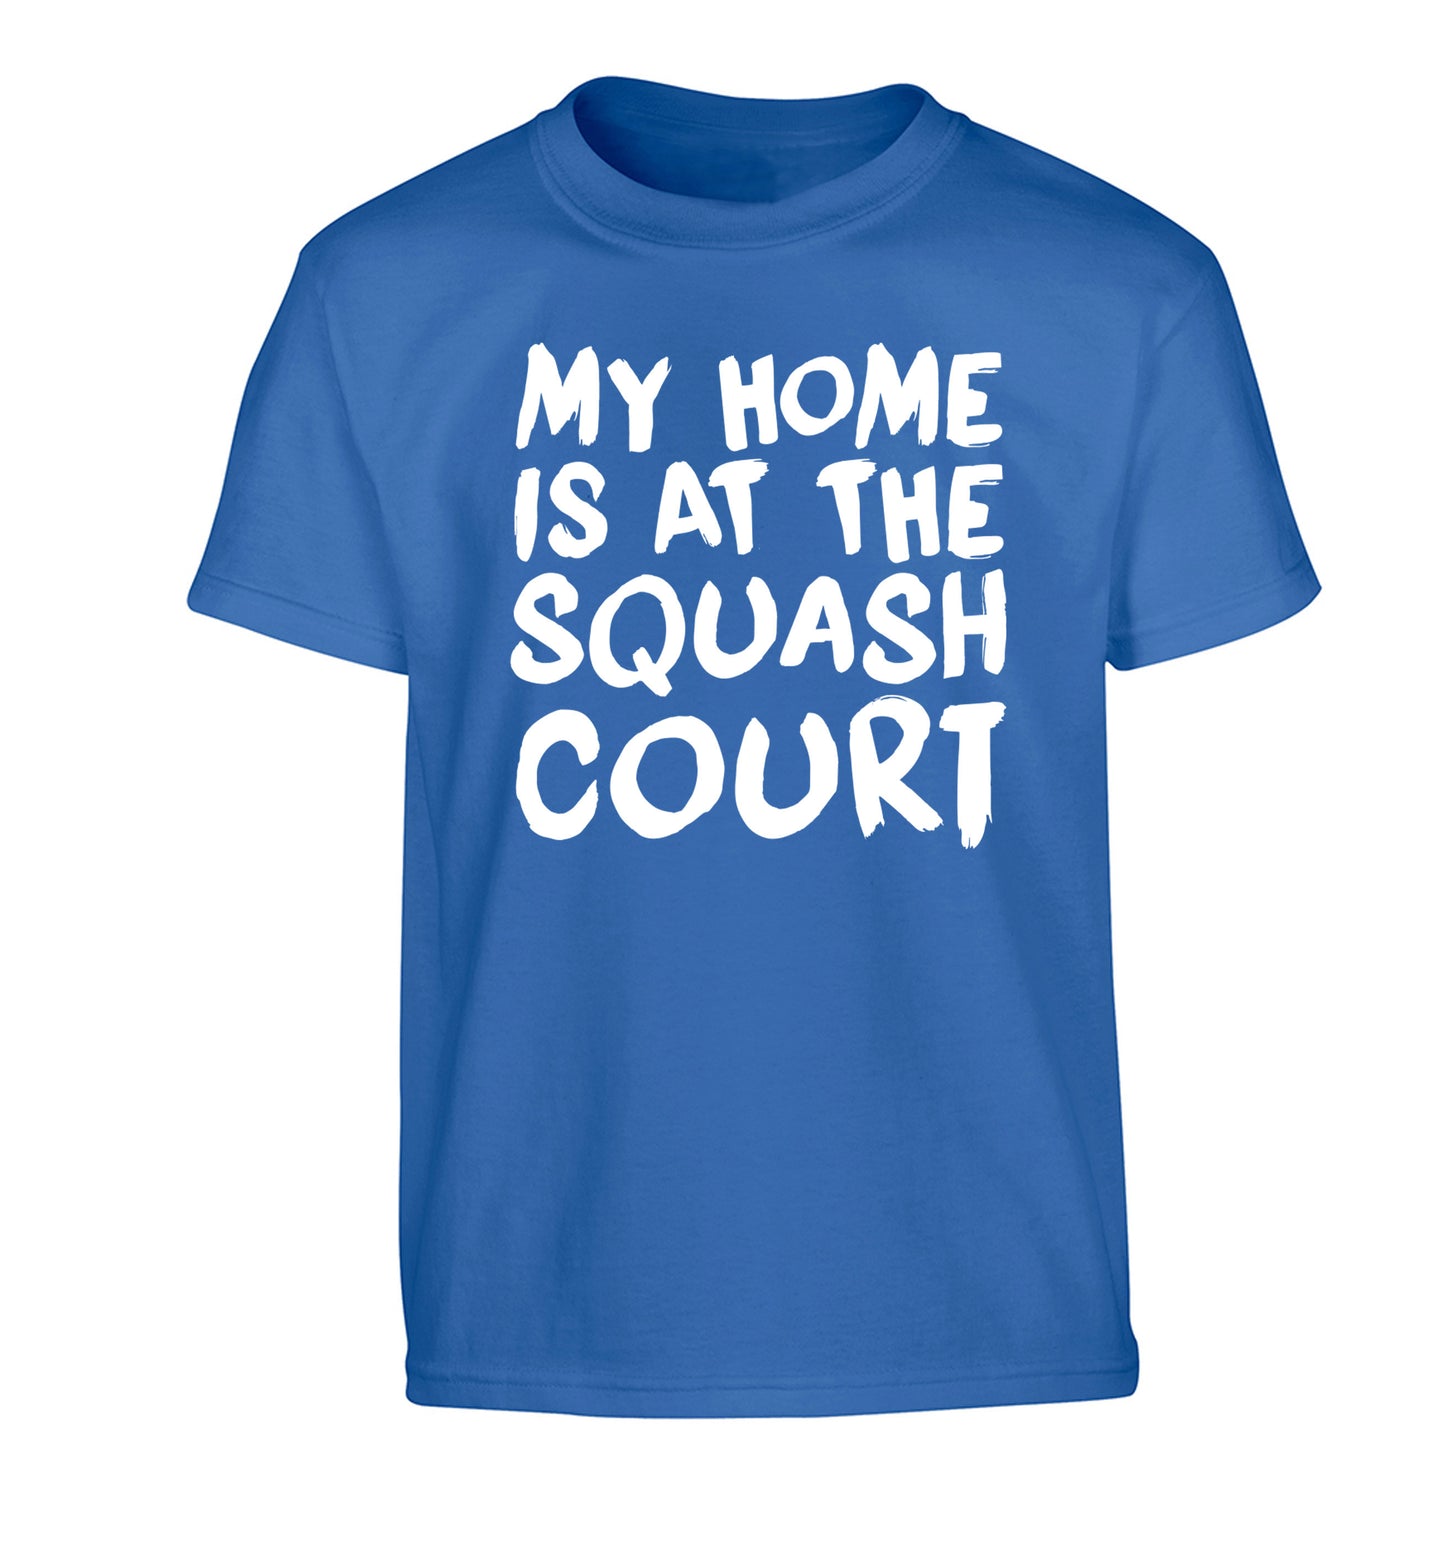 My home is at the squash court Children's blue Tshirt 12-14 Years